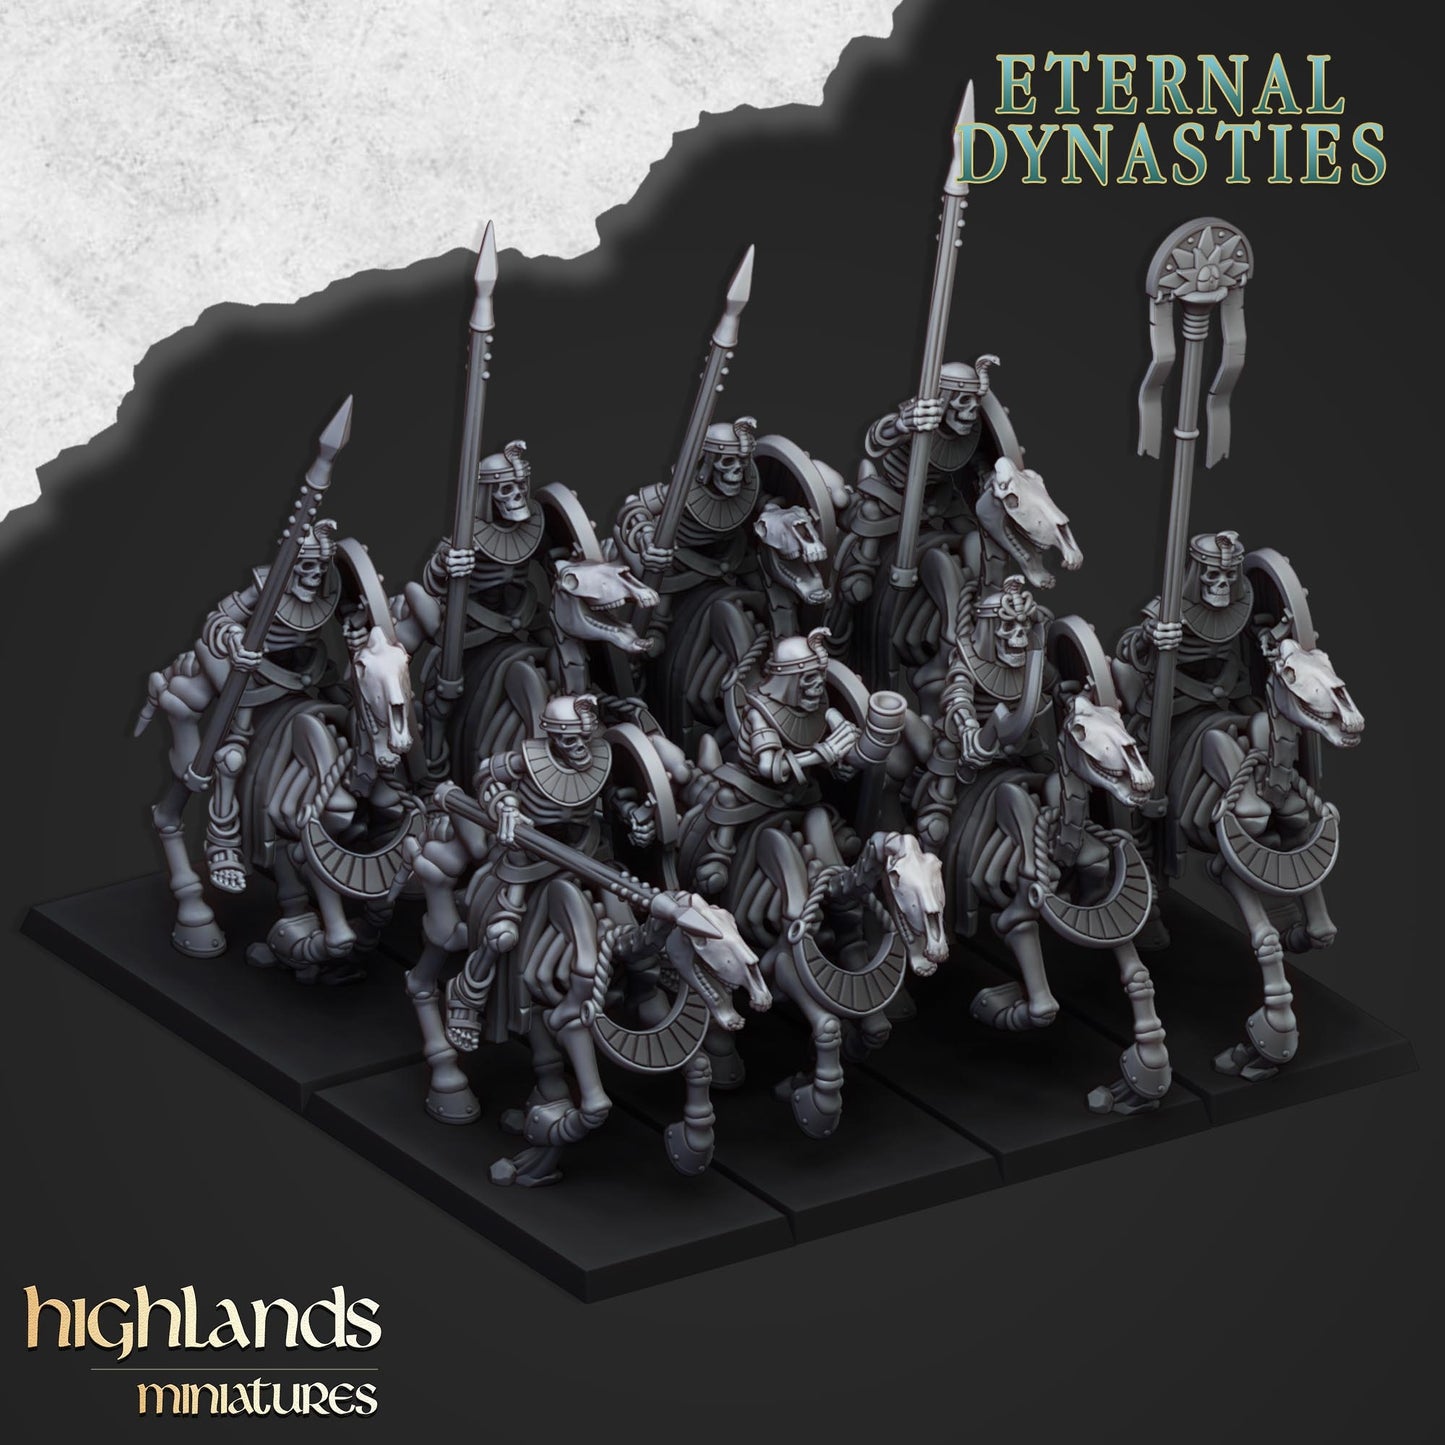 Ancient Skeletal Cavalry Unit with Spears by Highlands Miniatures